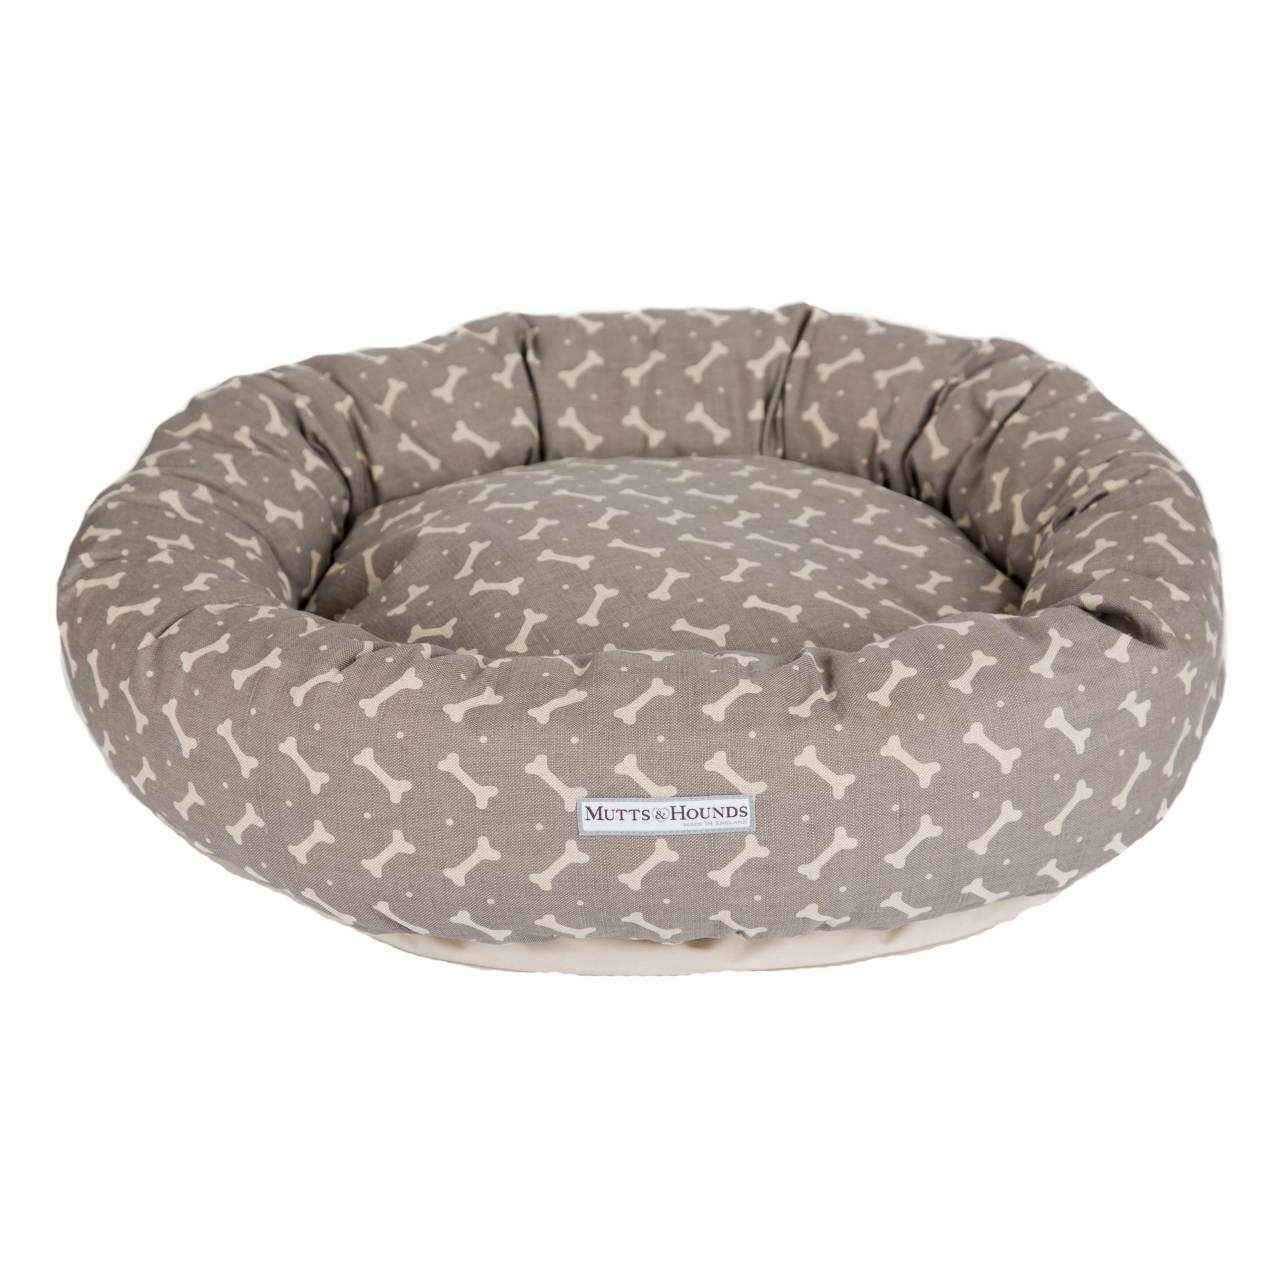 An image of Mutts & Hounds Mushroom Linen Donut Bed Large